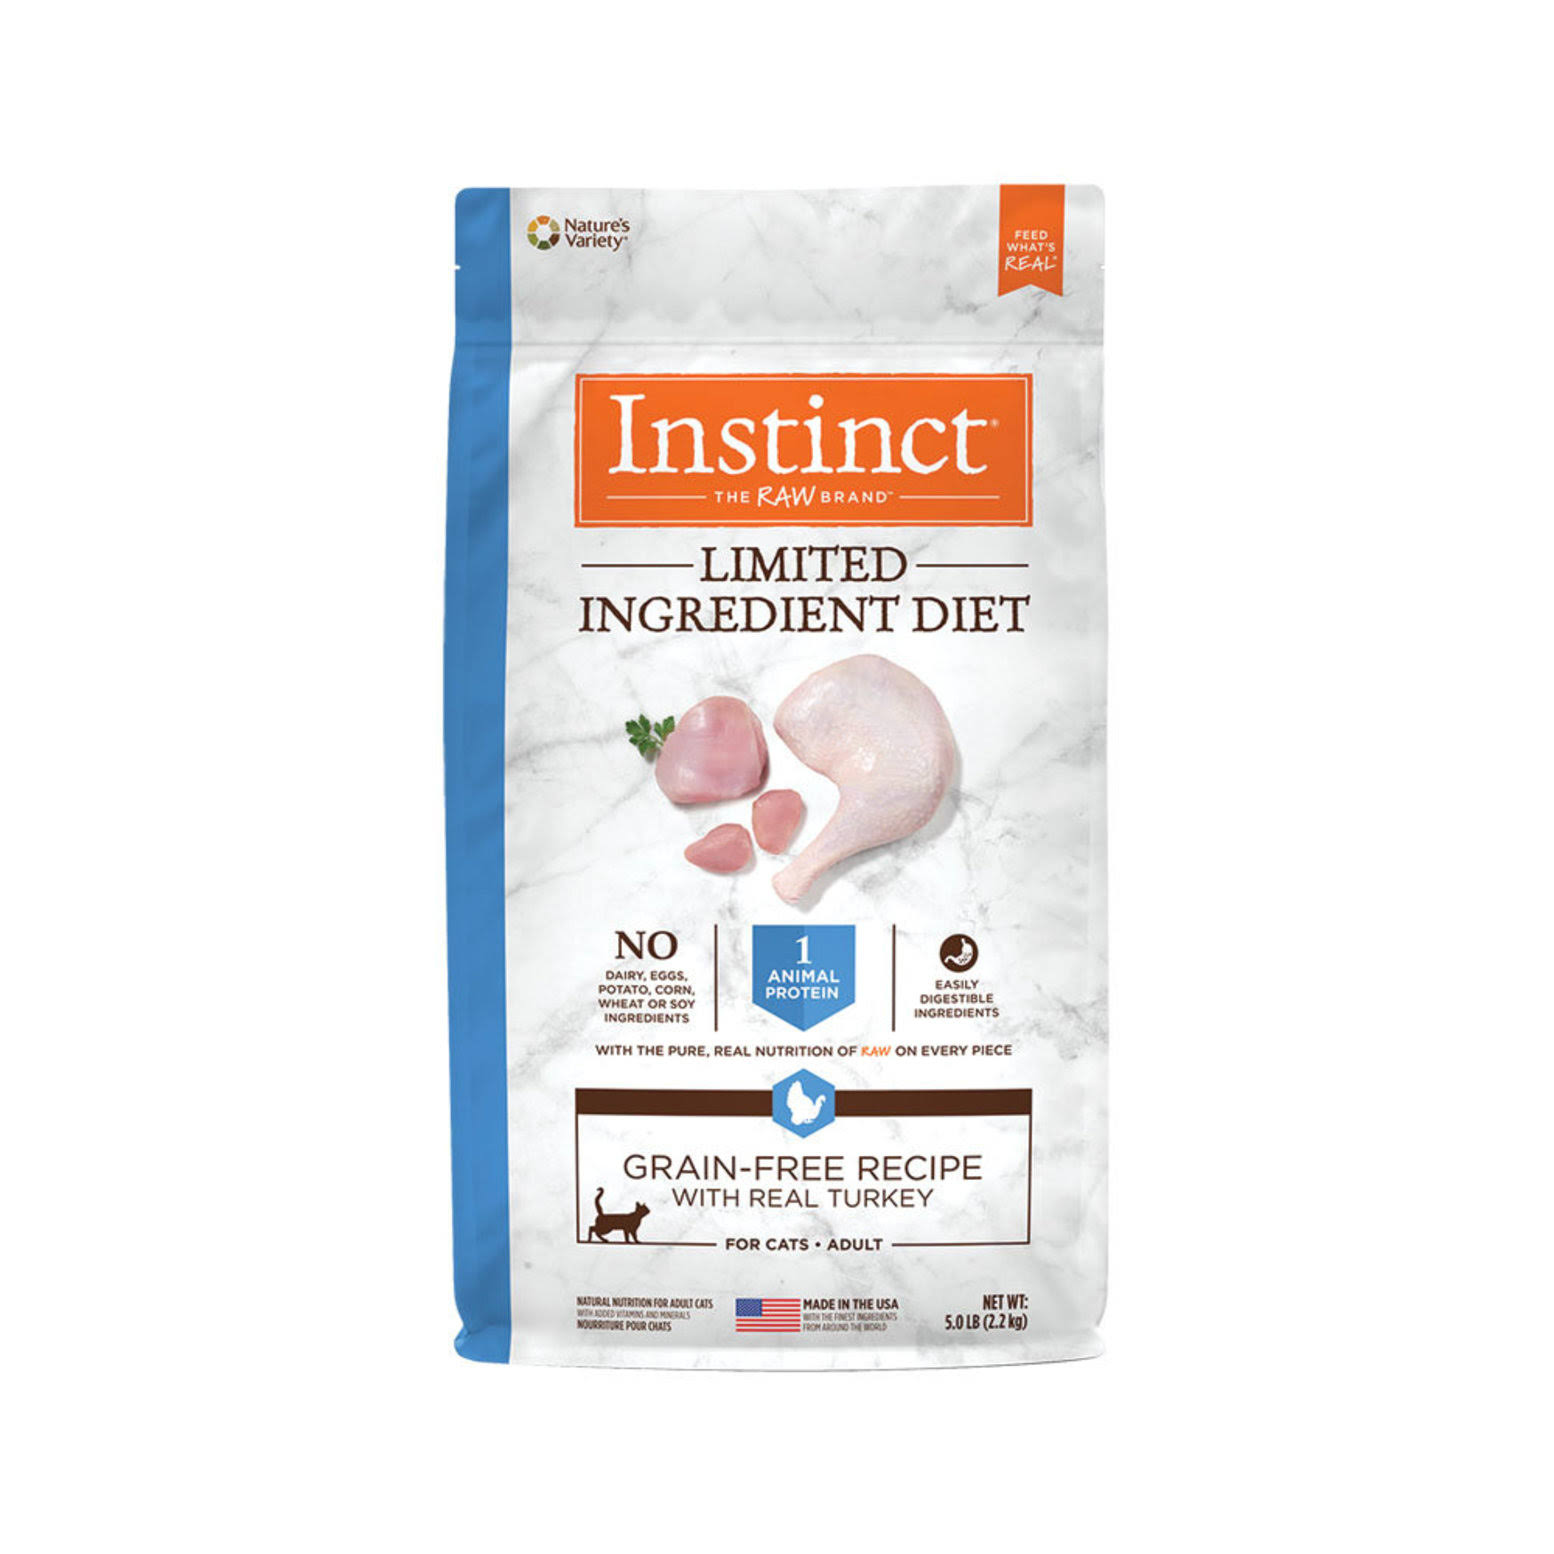 Instinct Limited Ingredient Diet Grain-Free Recipe with Real Turkey for Cats